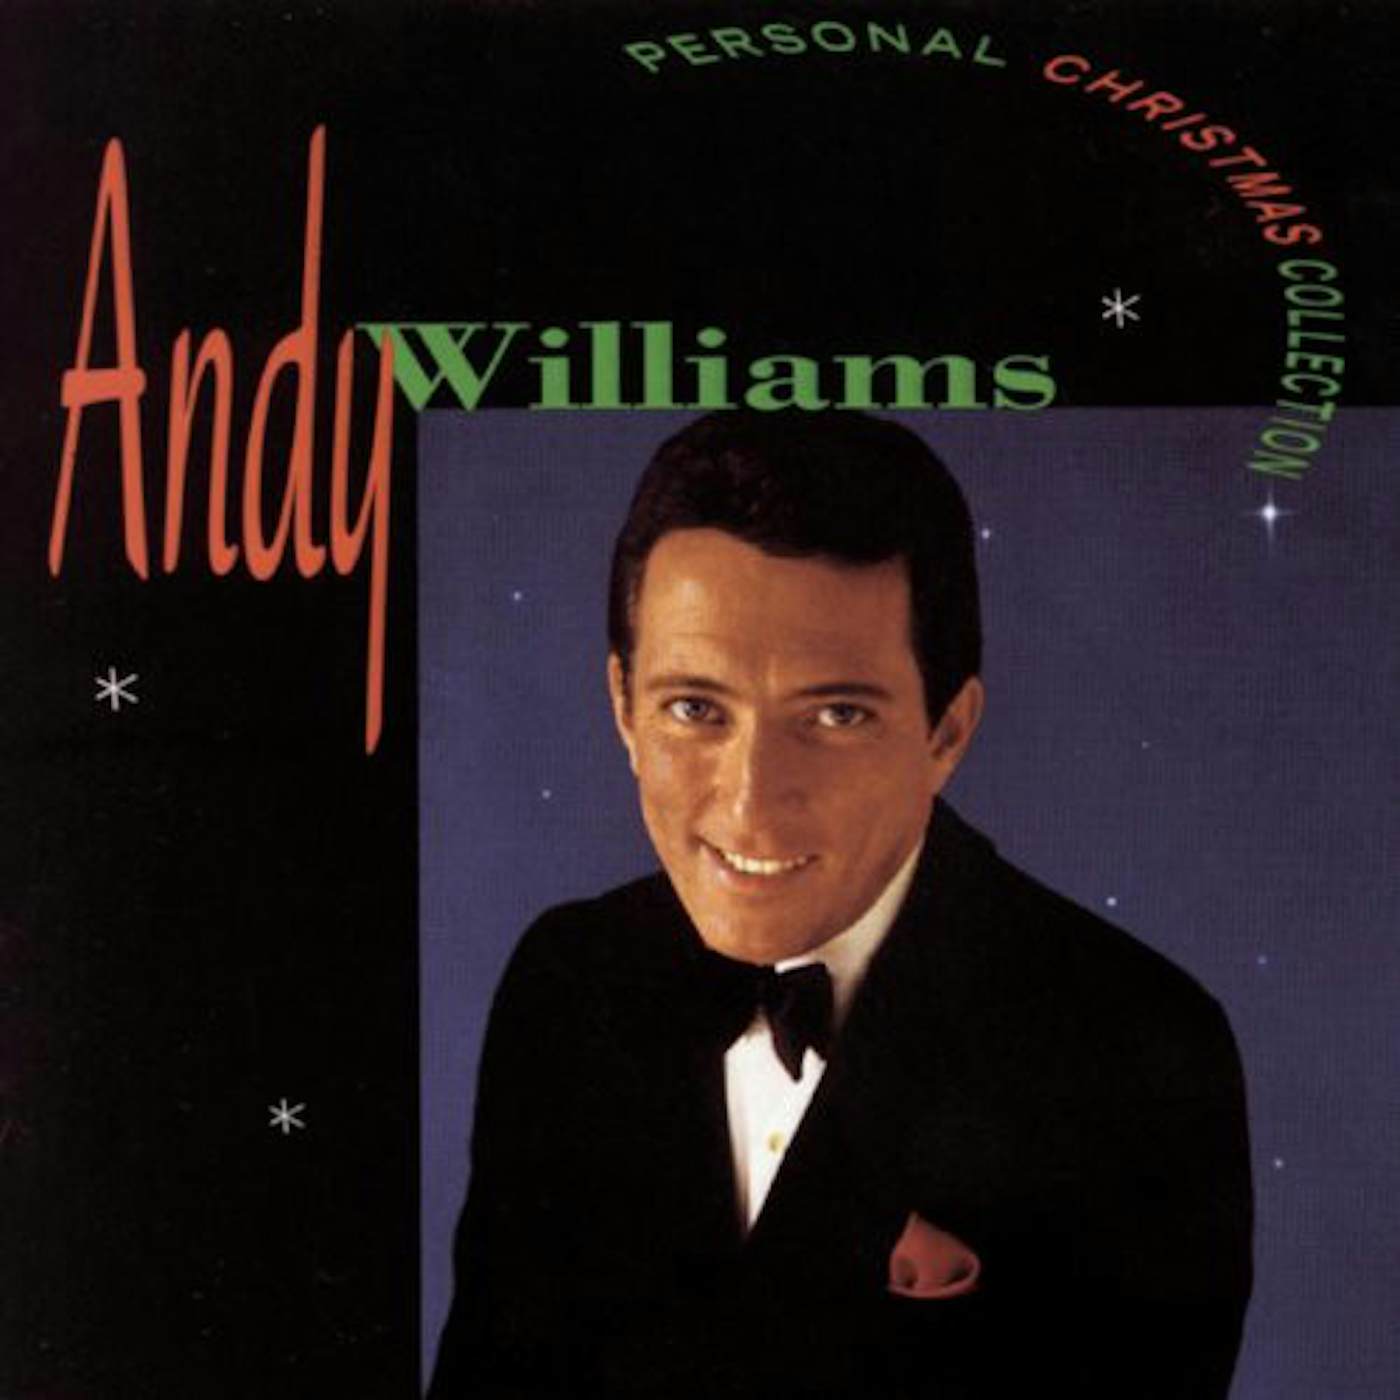 Andy Williams Personal Christmas Collection Vinyl Record